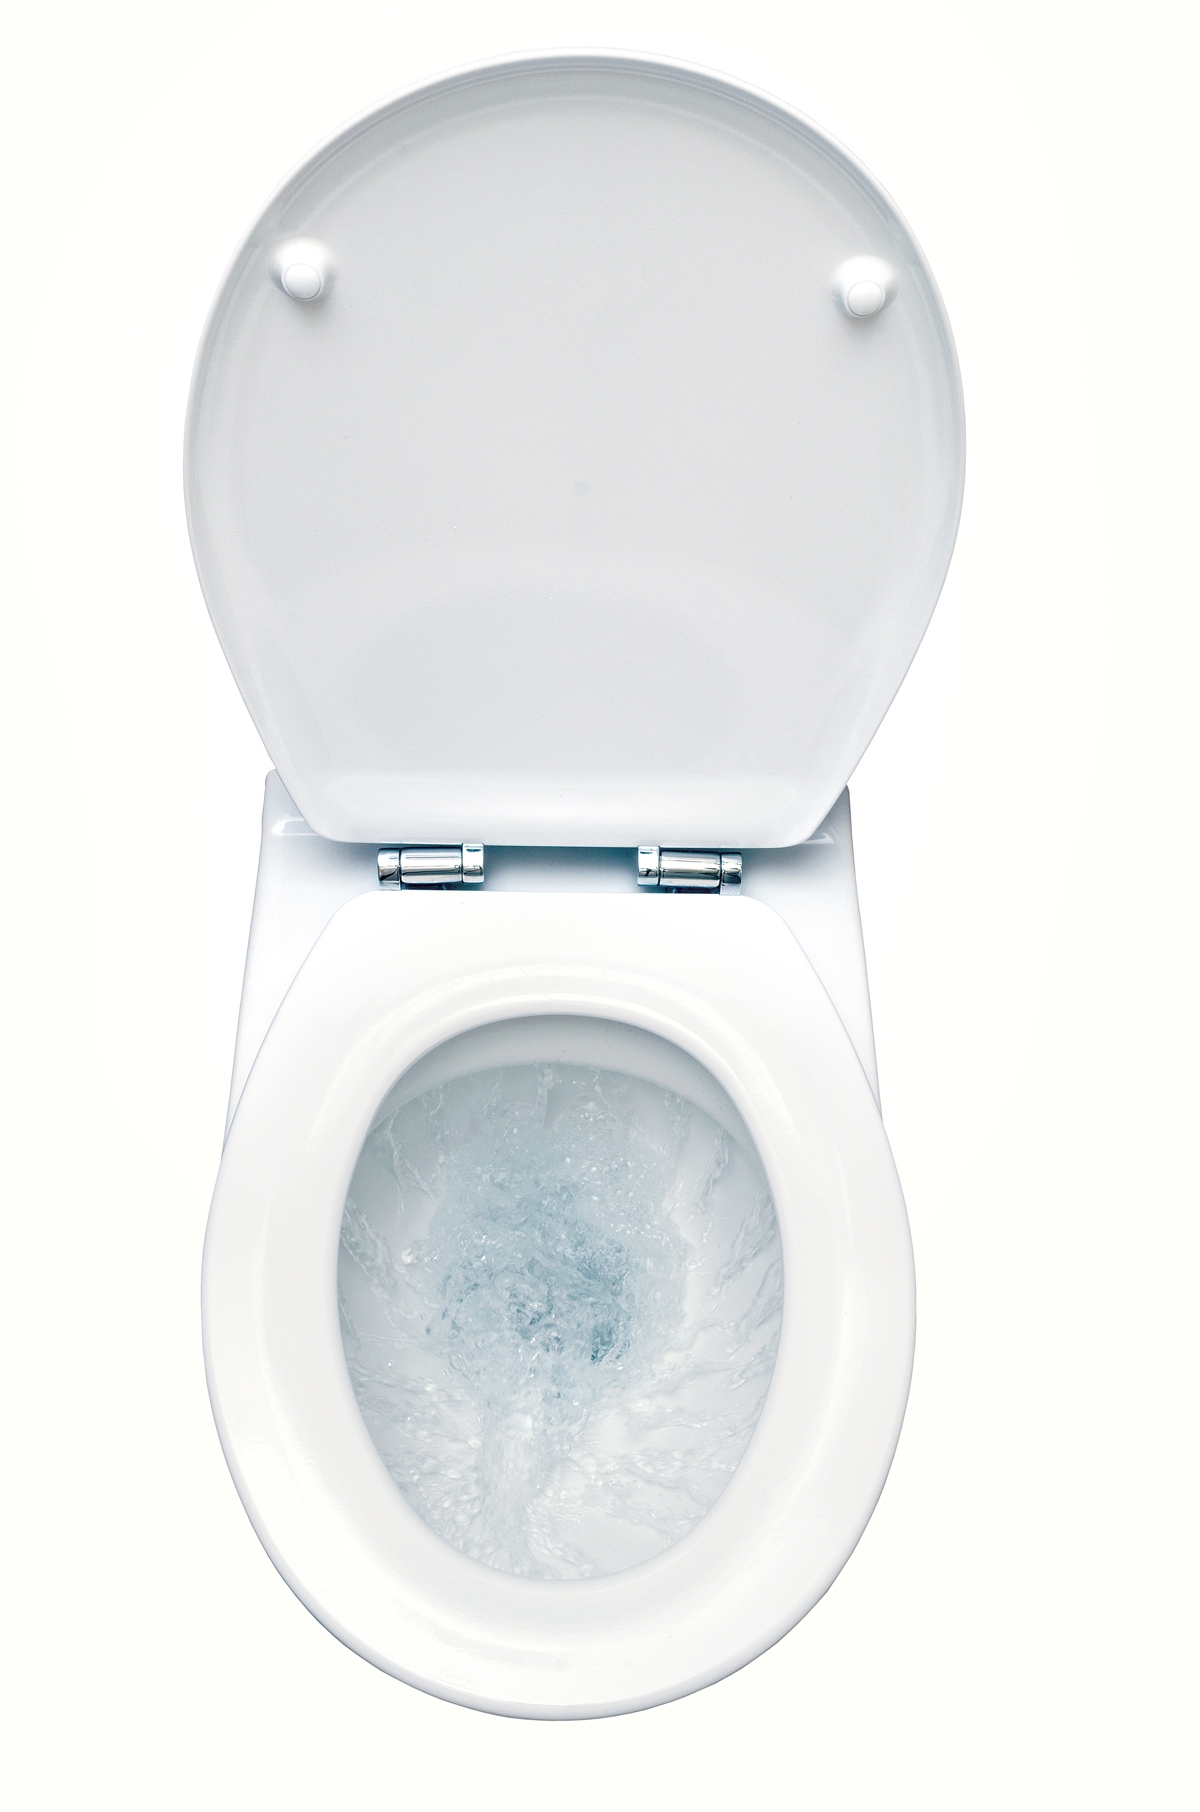 The toilet gets a makeover - Chemical & Engineering News